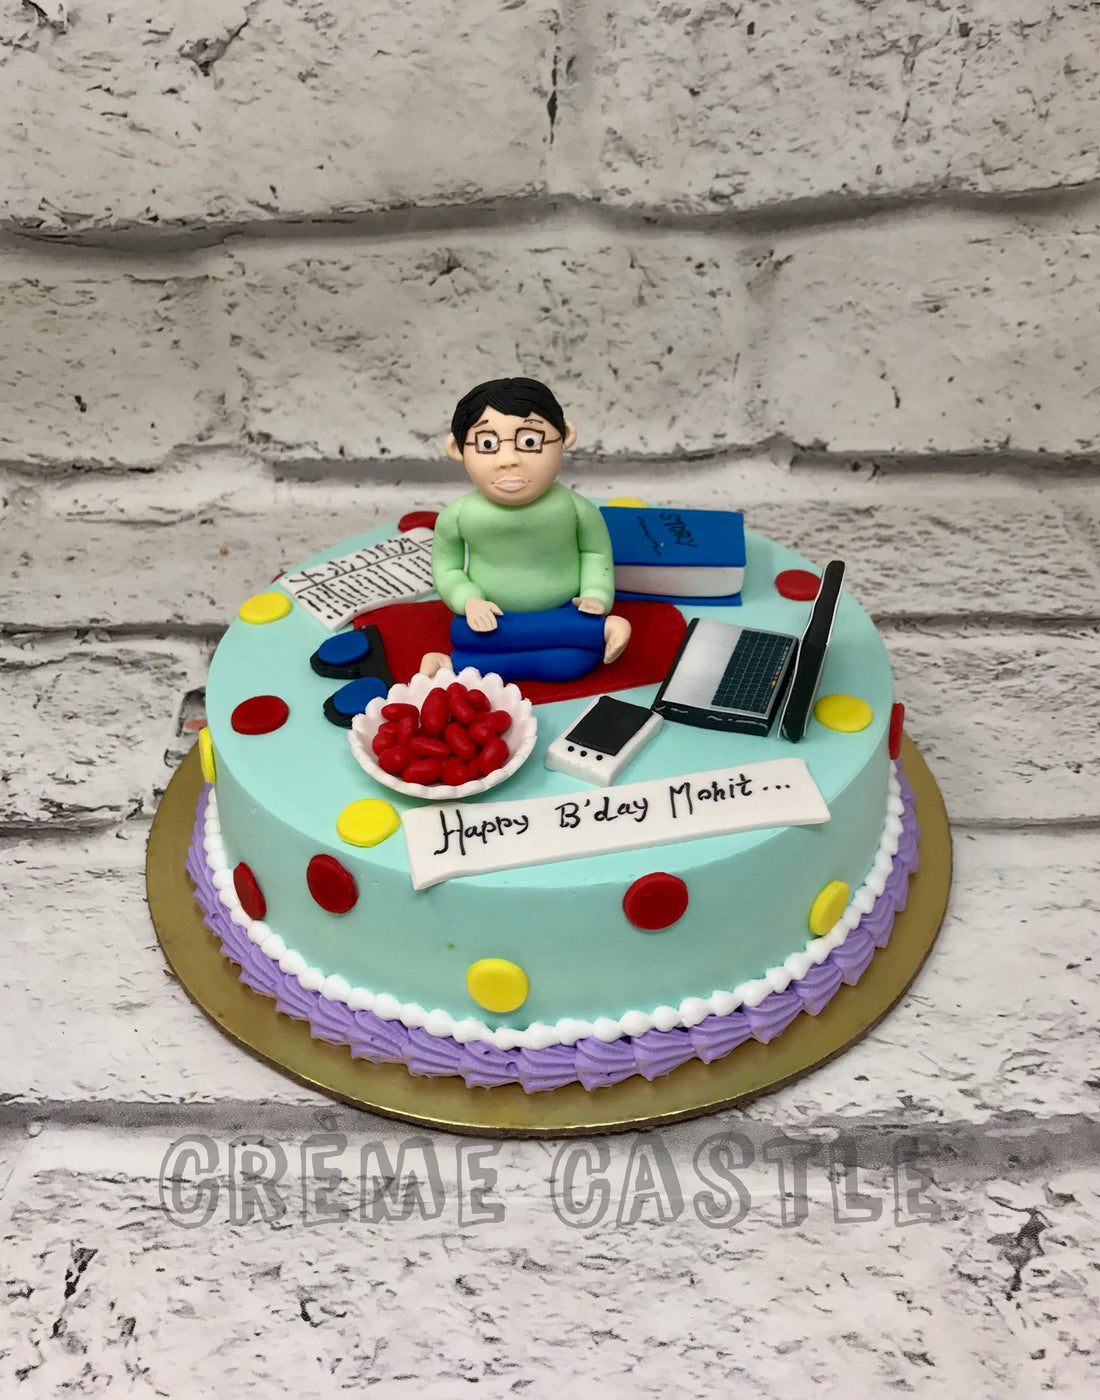 Working Doctor cake